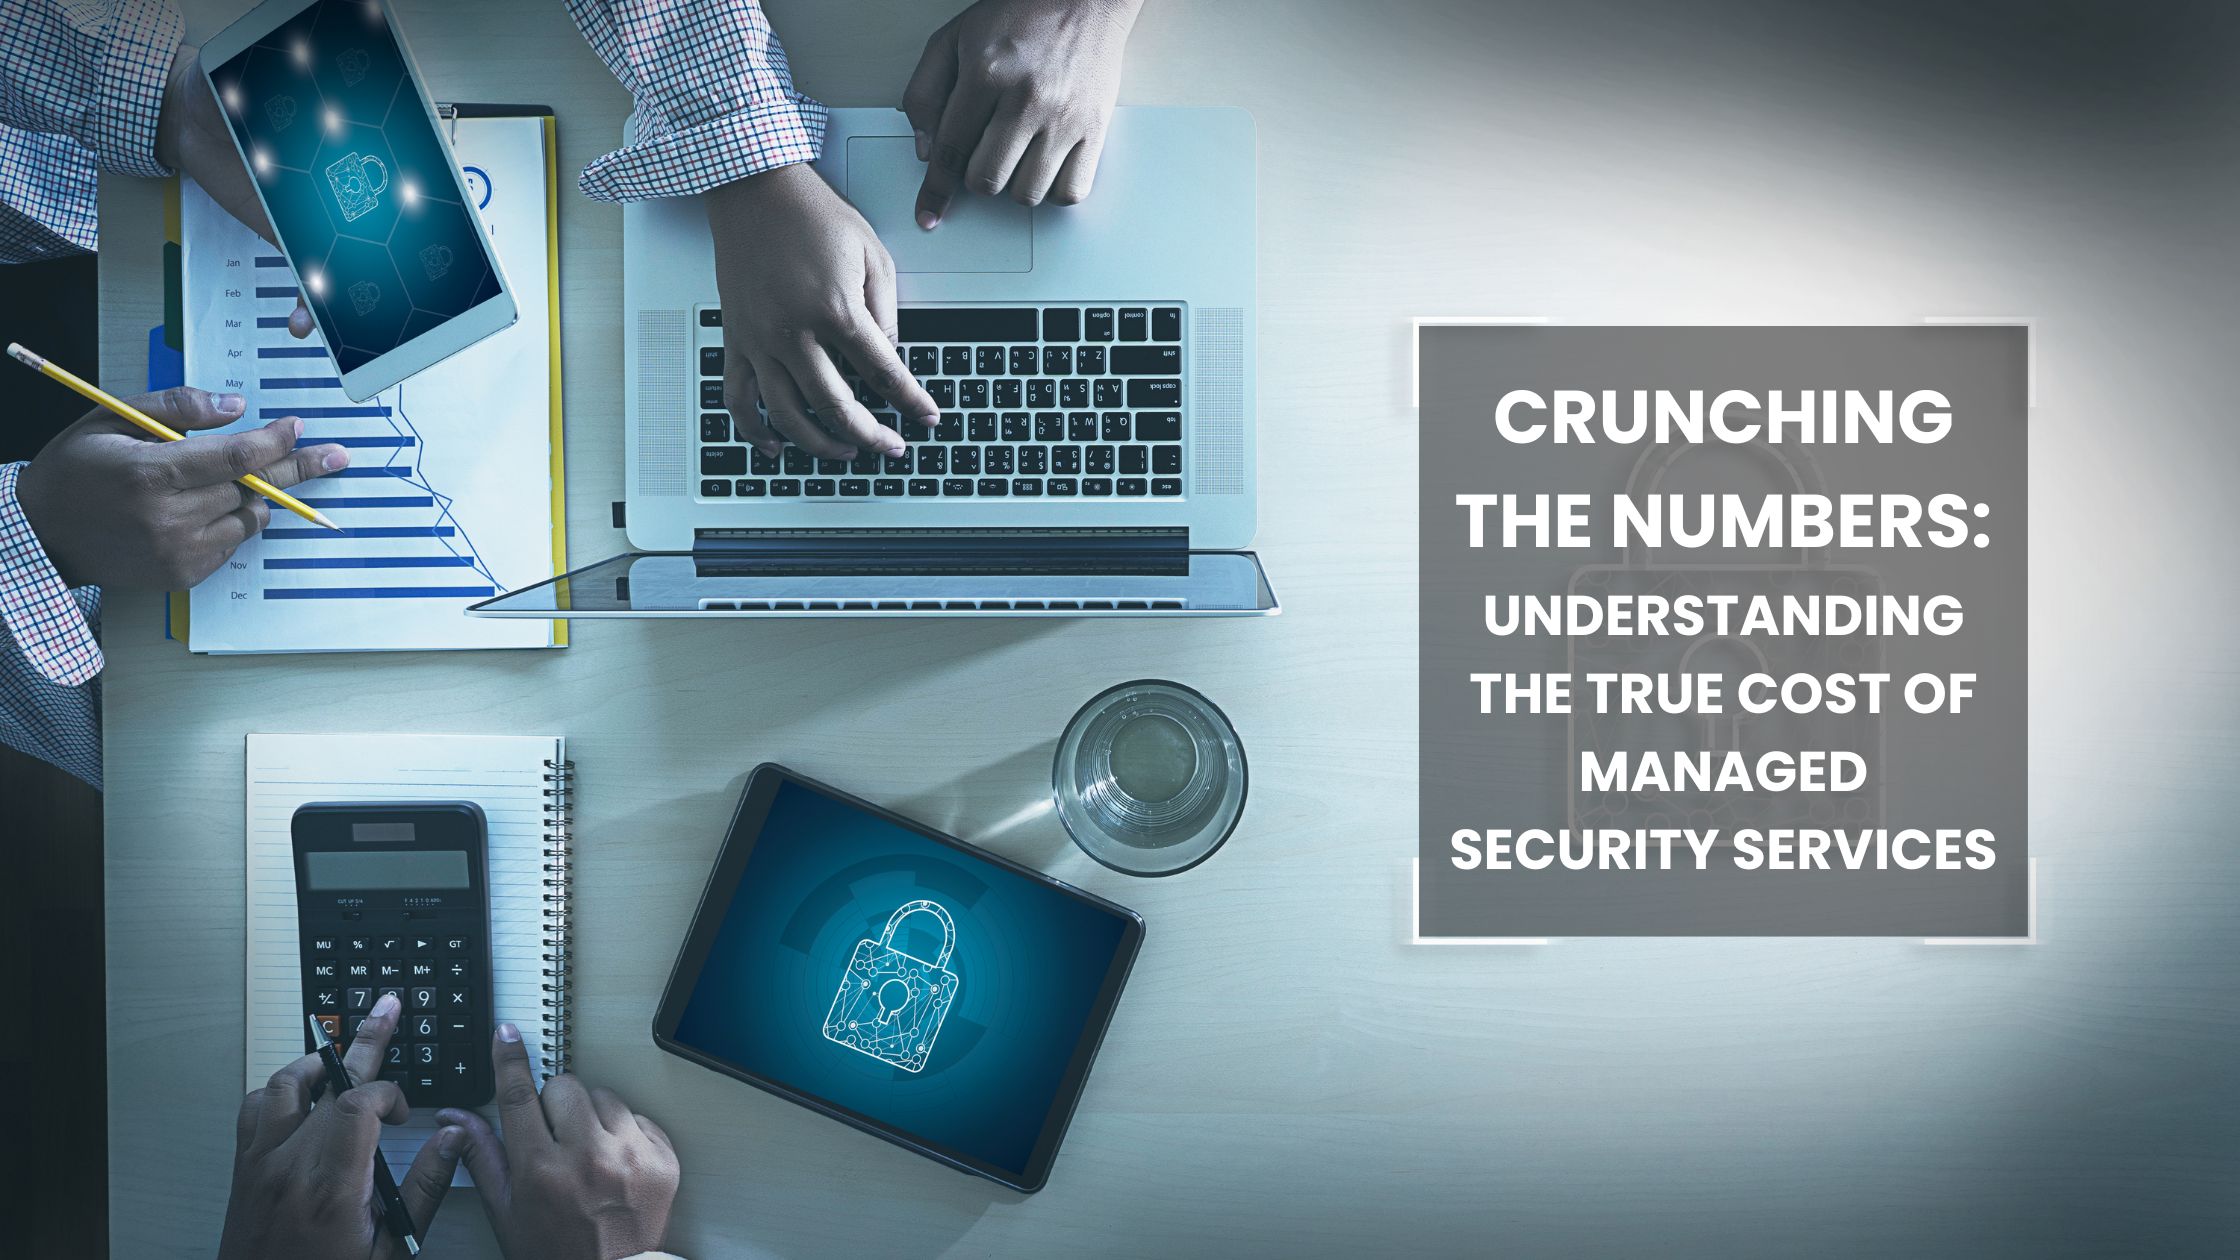 Crunching the Numbers: Understanding the true cost of Managed Security Services